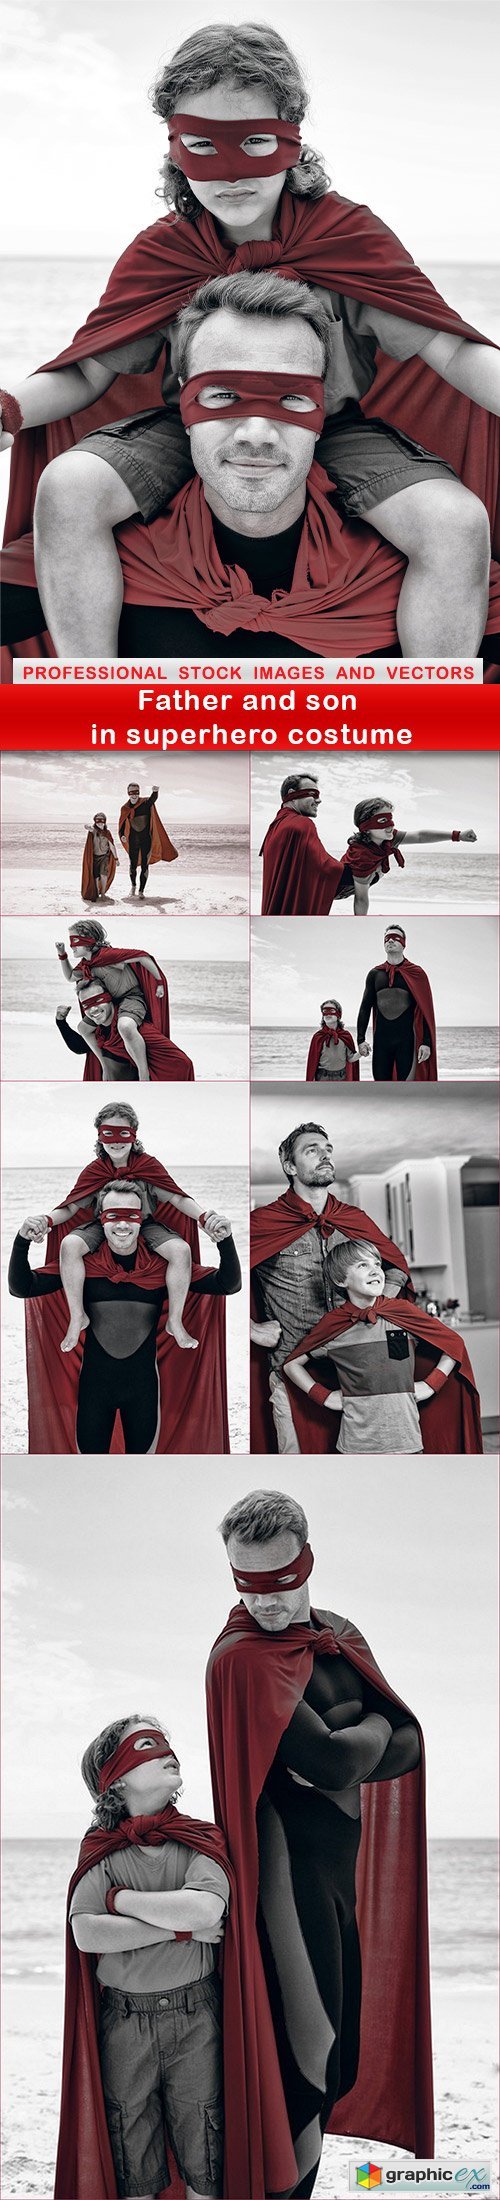 Father and son in superhero costume - 8 UHQ JPEG